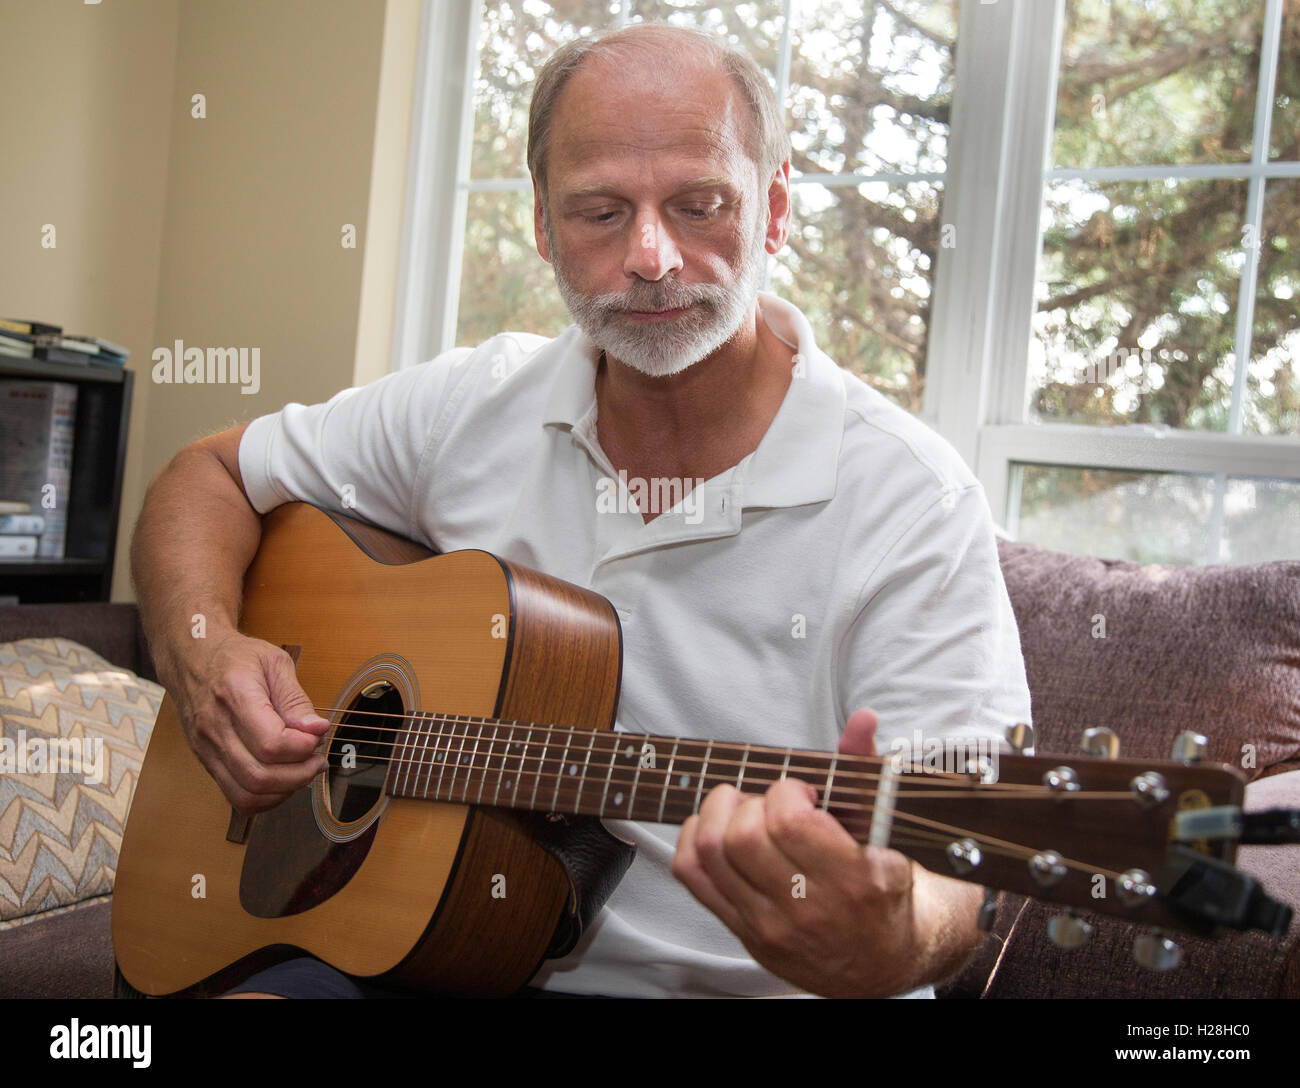 Man playing guitar in his apartment Stock Photo